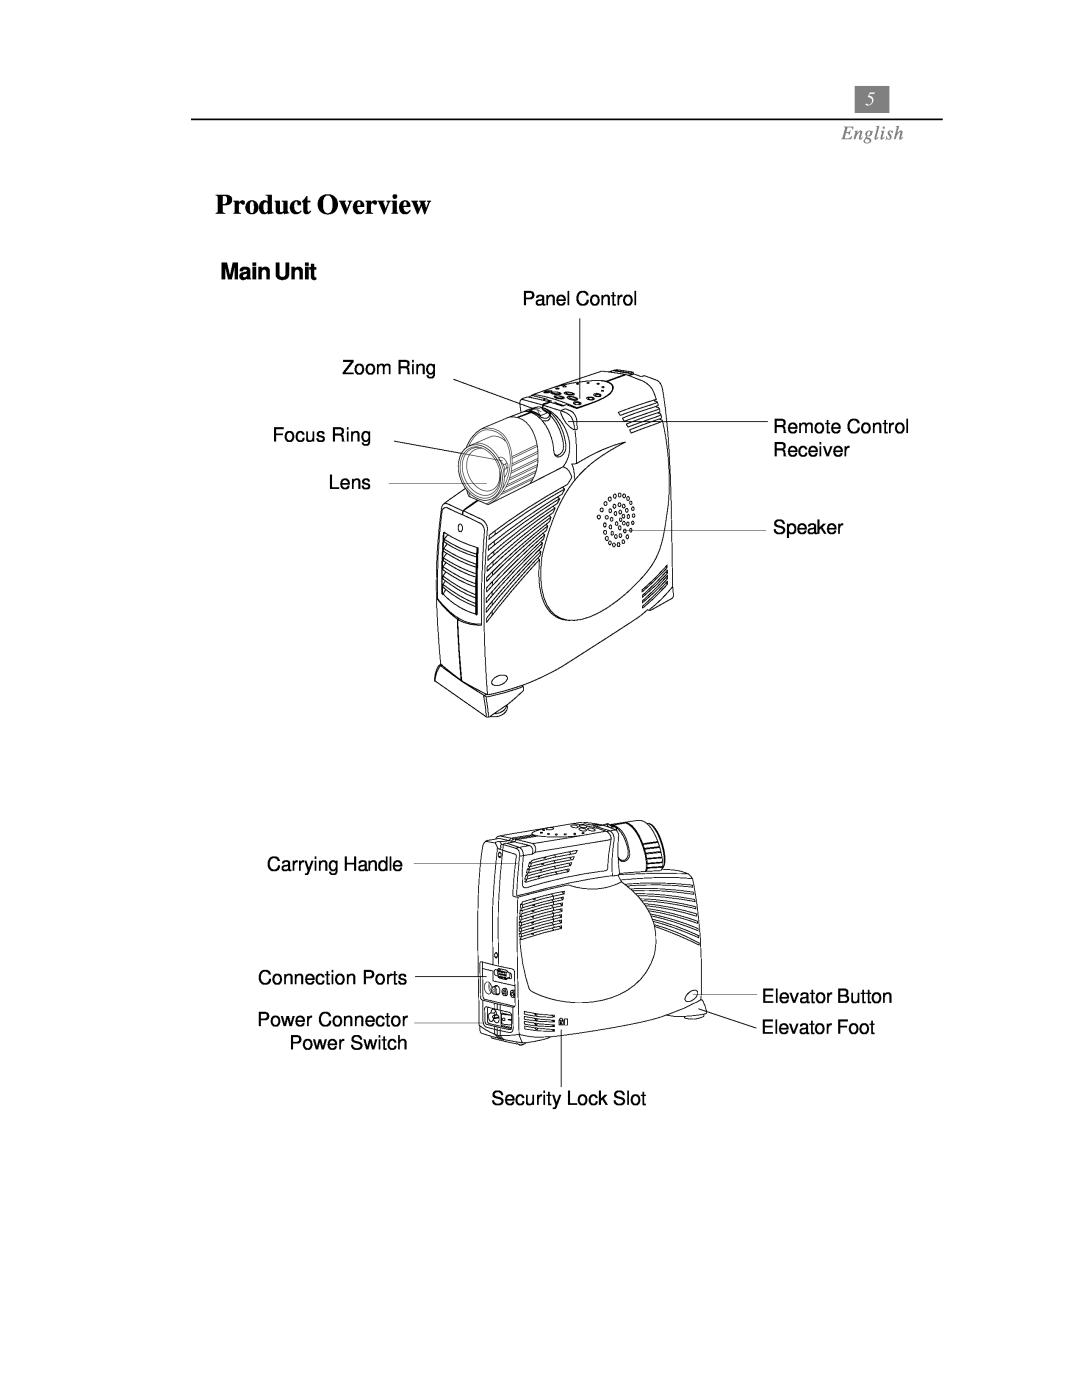 Optoma Technology EP718 specifications Product Overview, Main Unit, English 